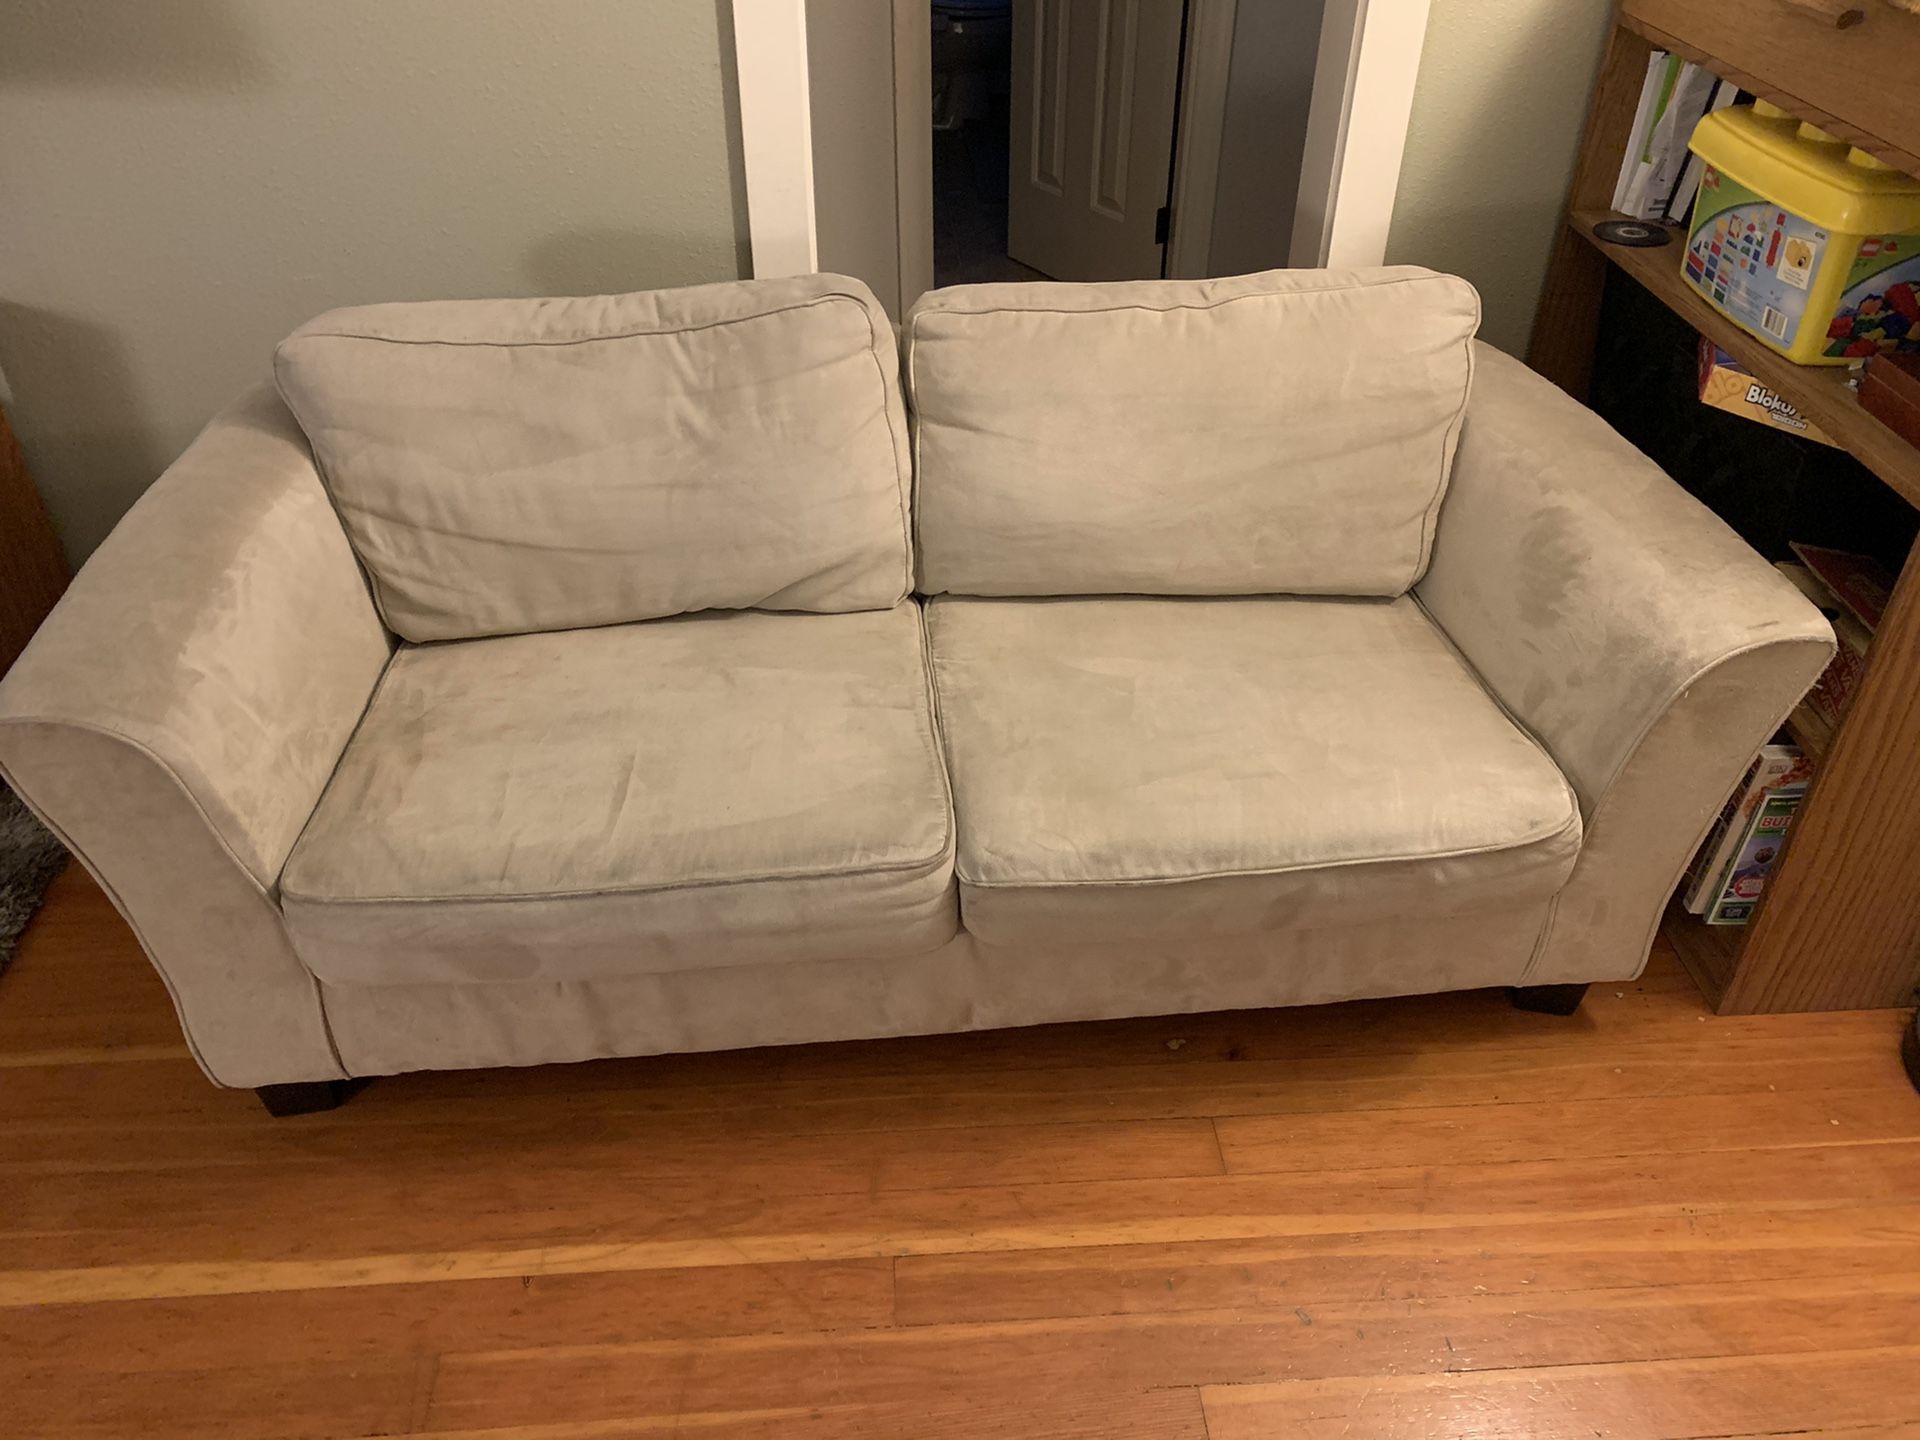 Small couch/sofa or loveseat.